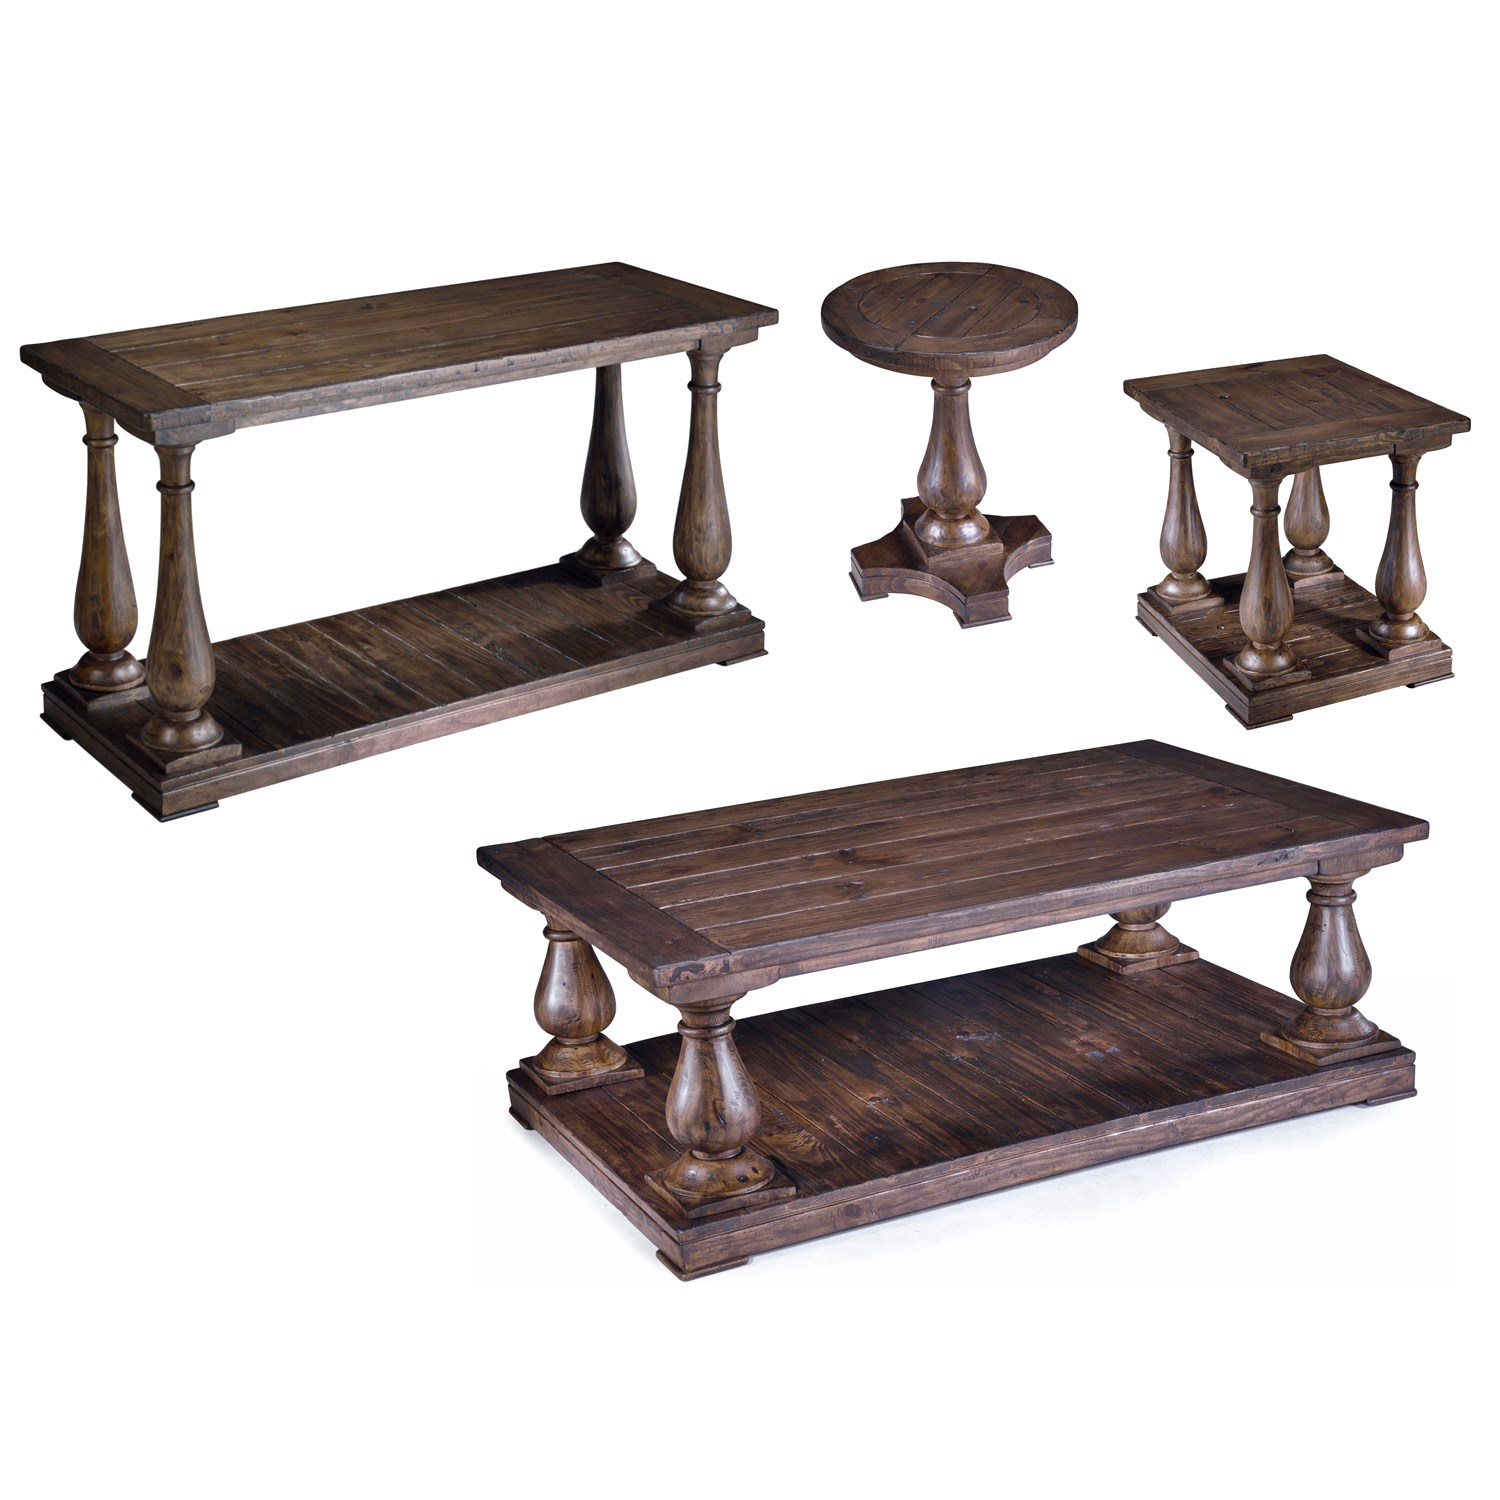 Magnussen Home T1695 Densbury Coffee Table Set The Simple Stores with regard to size 1500 X 1500